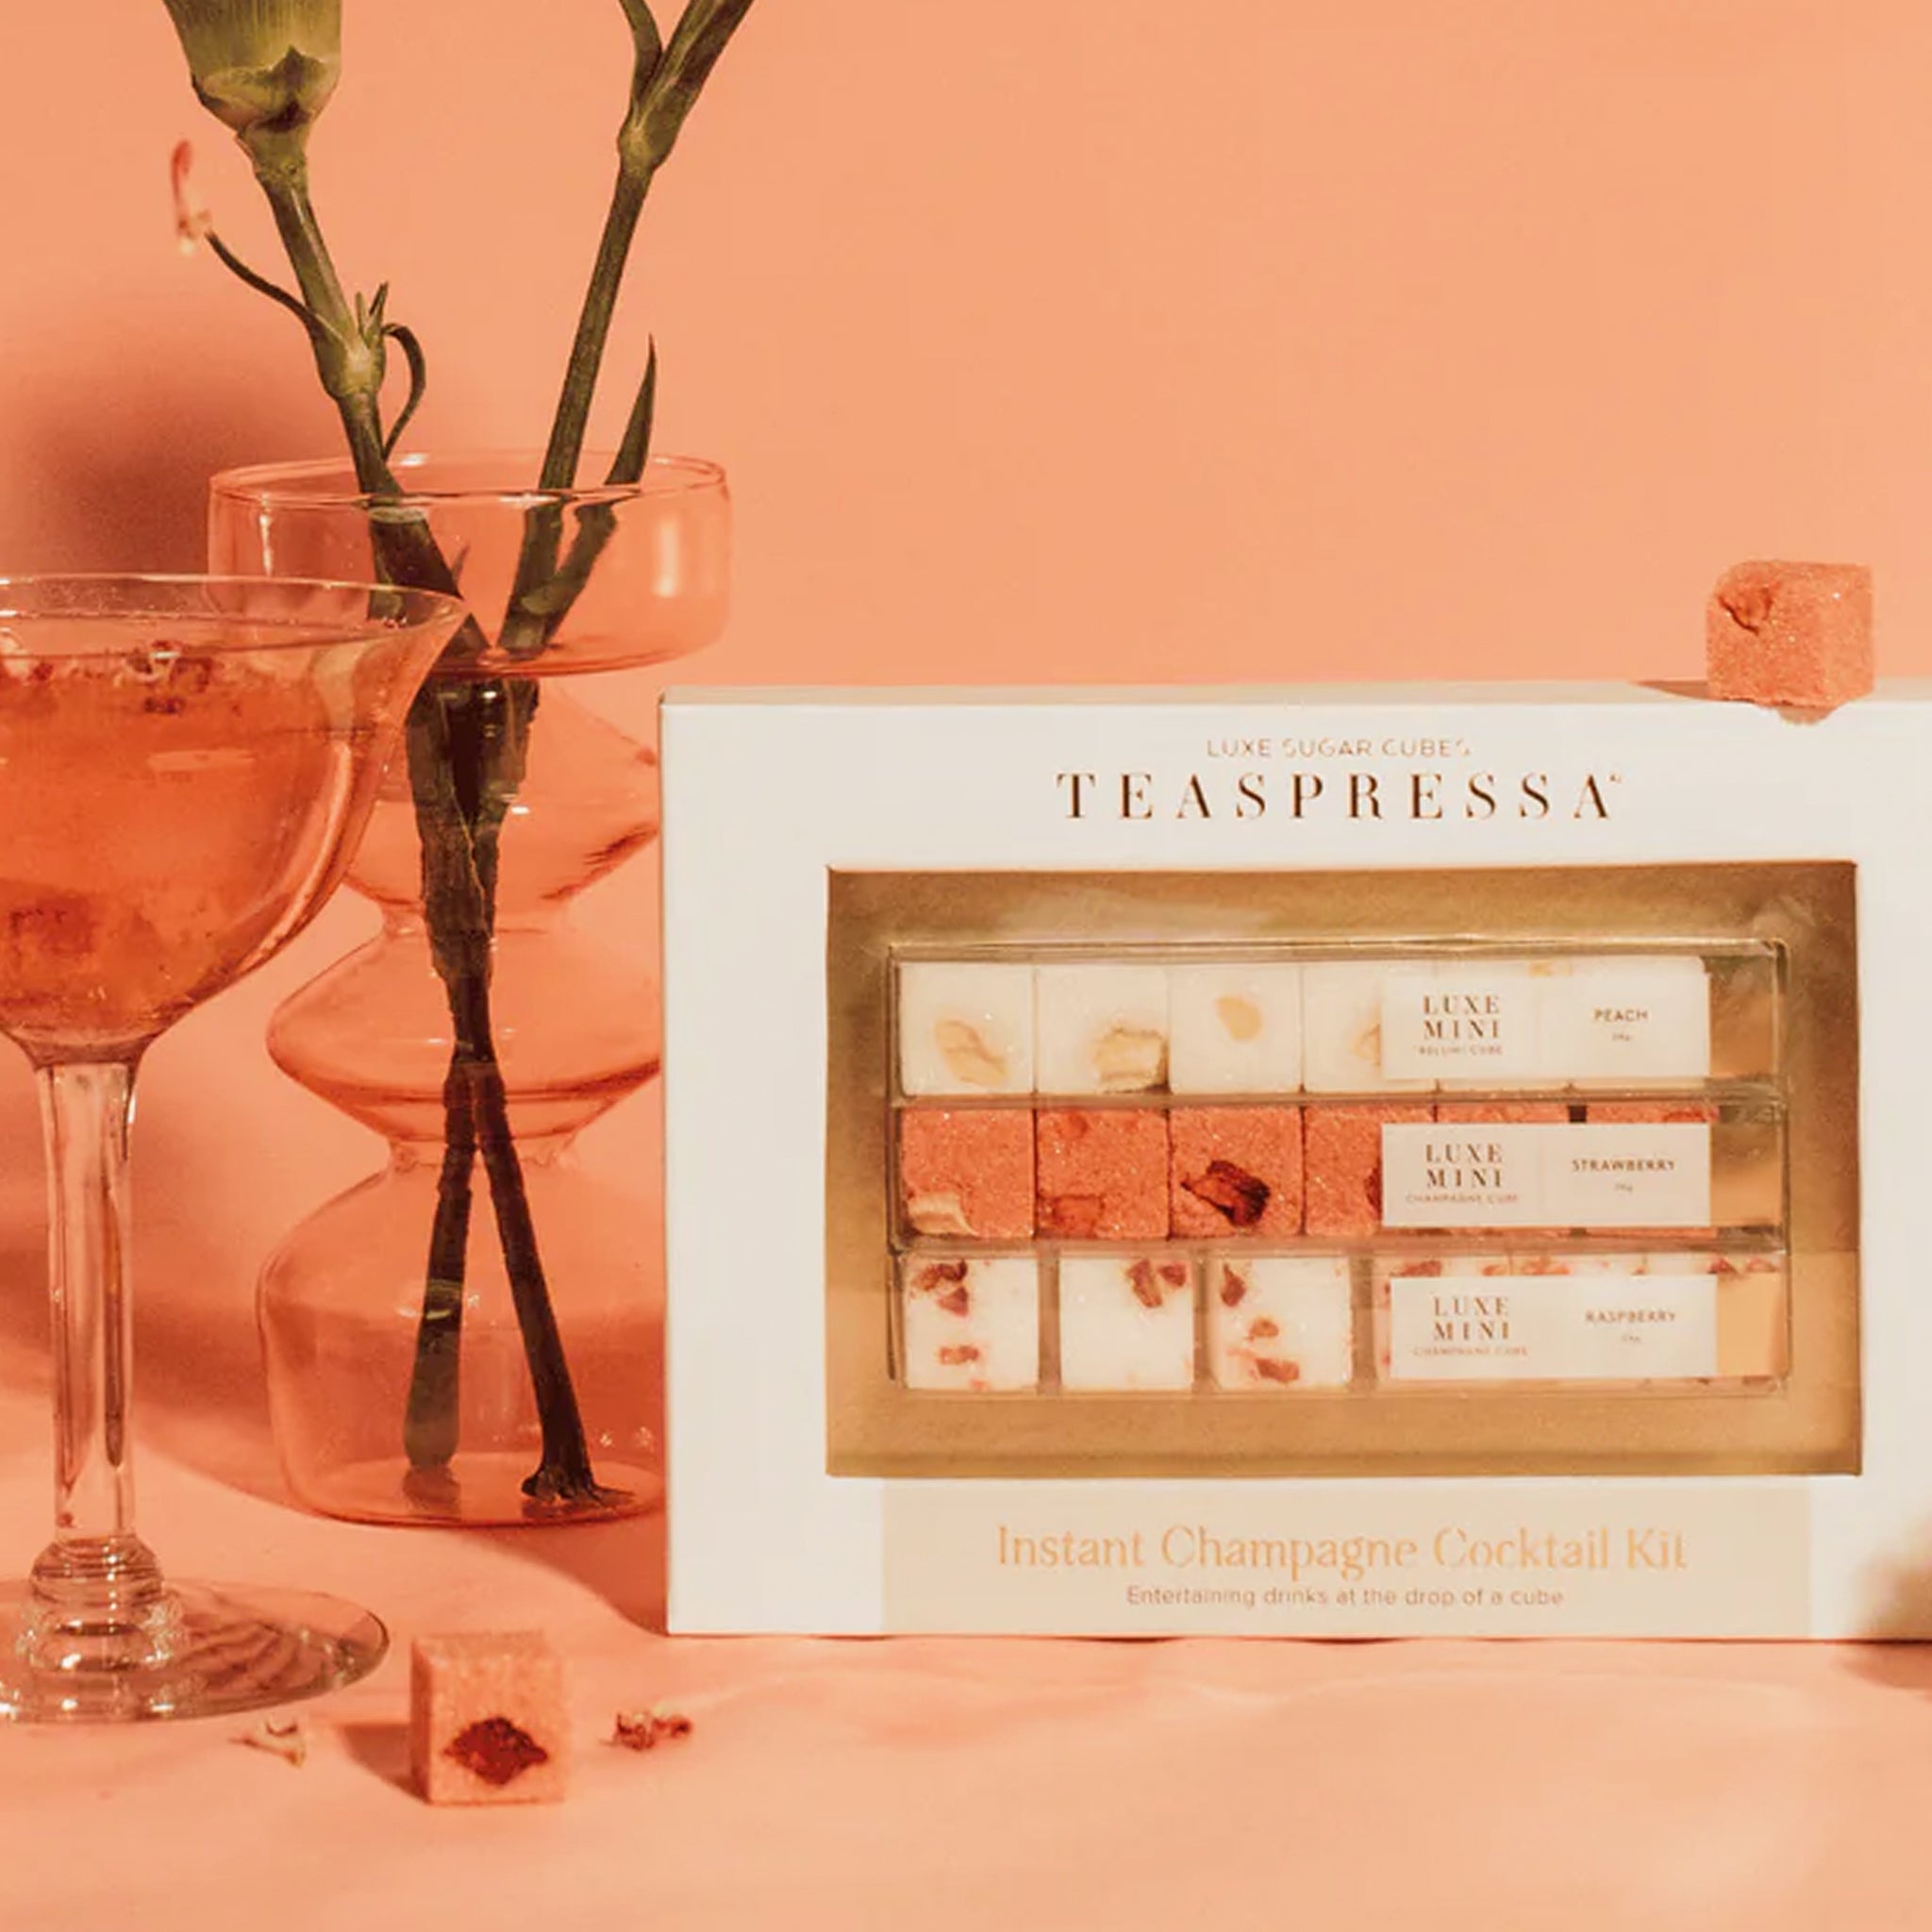 On a pink background is a sugar cube cocktail kit that reads, &quot;Teaspressa Instant Champagne Cocktail Kit&quot; with a set of three sugar cube strips that come in three flavors.